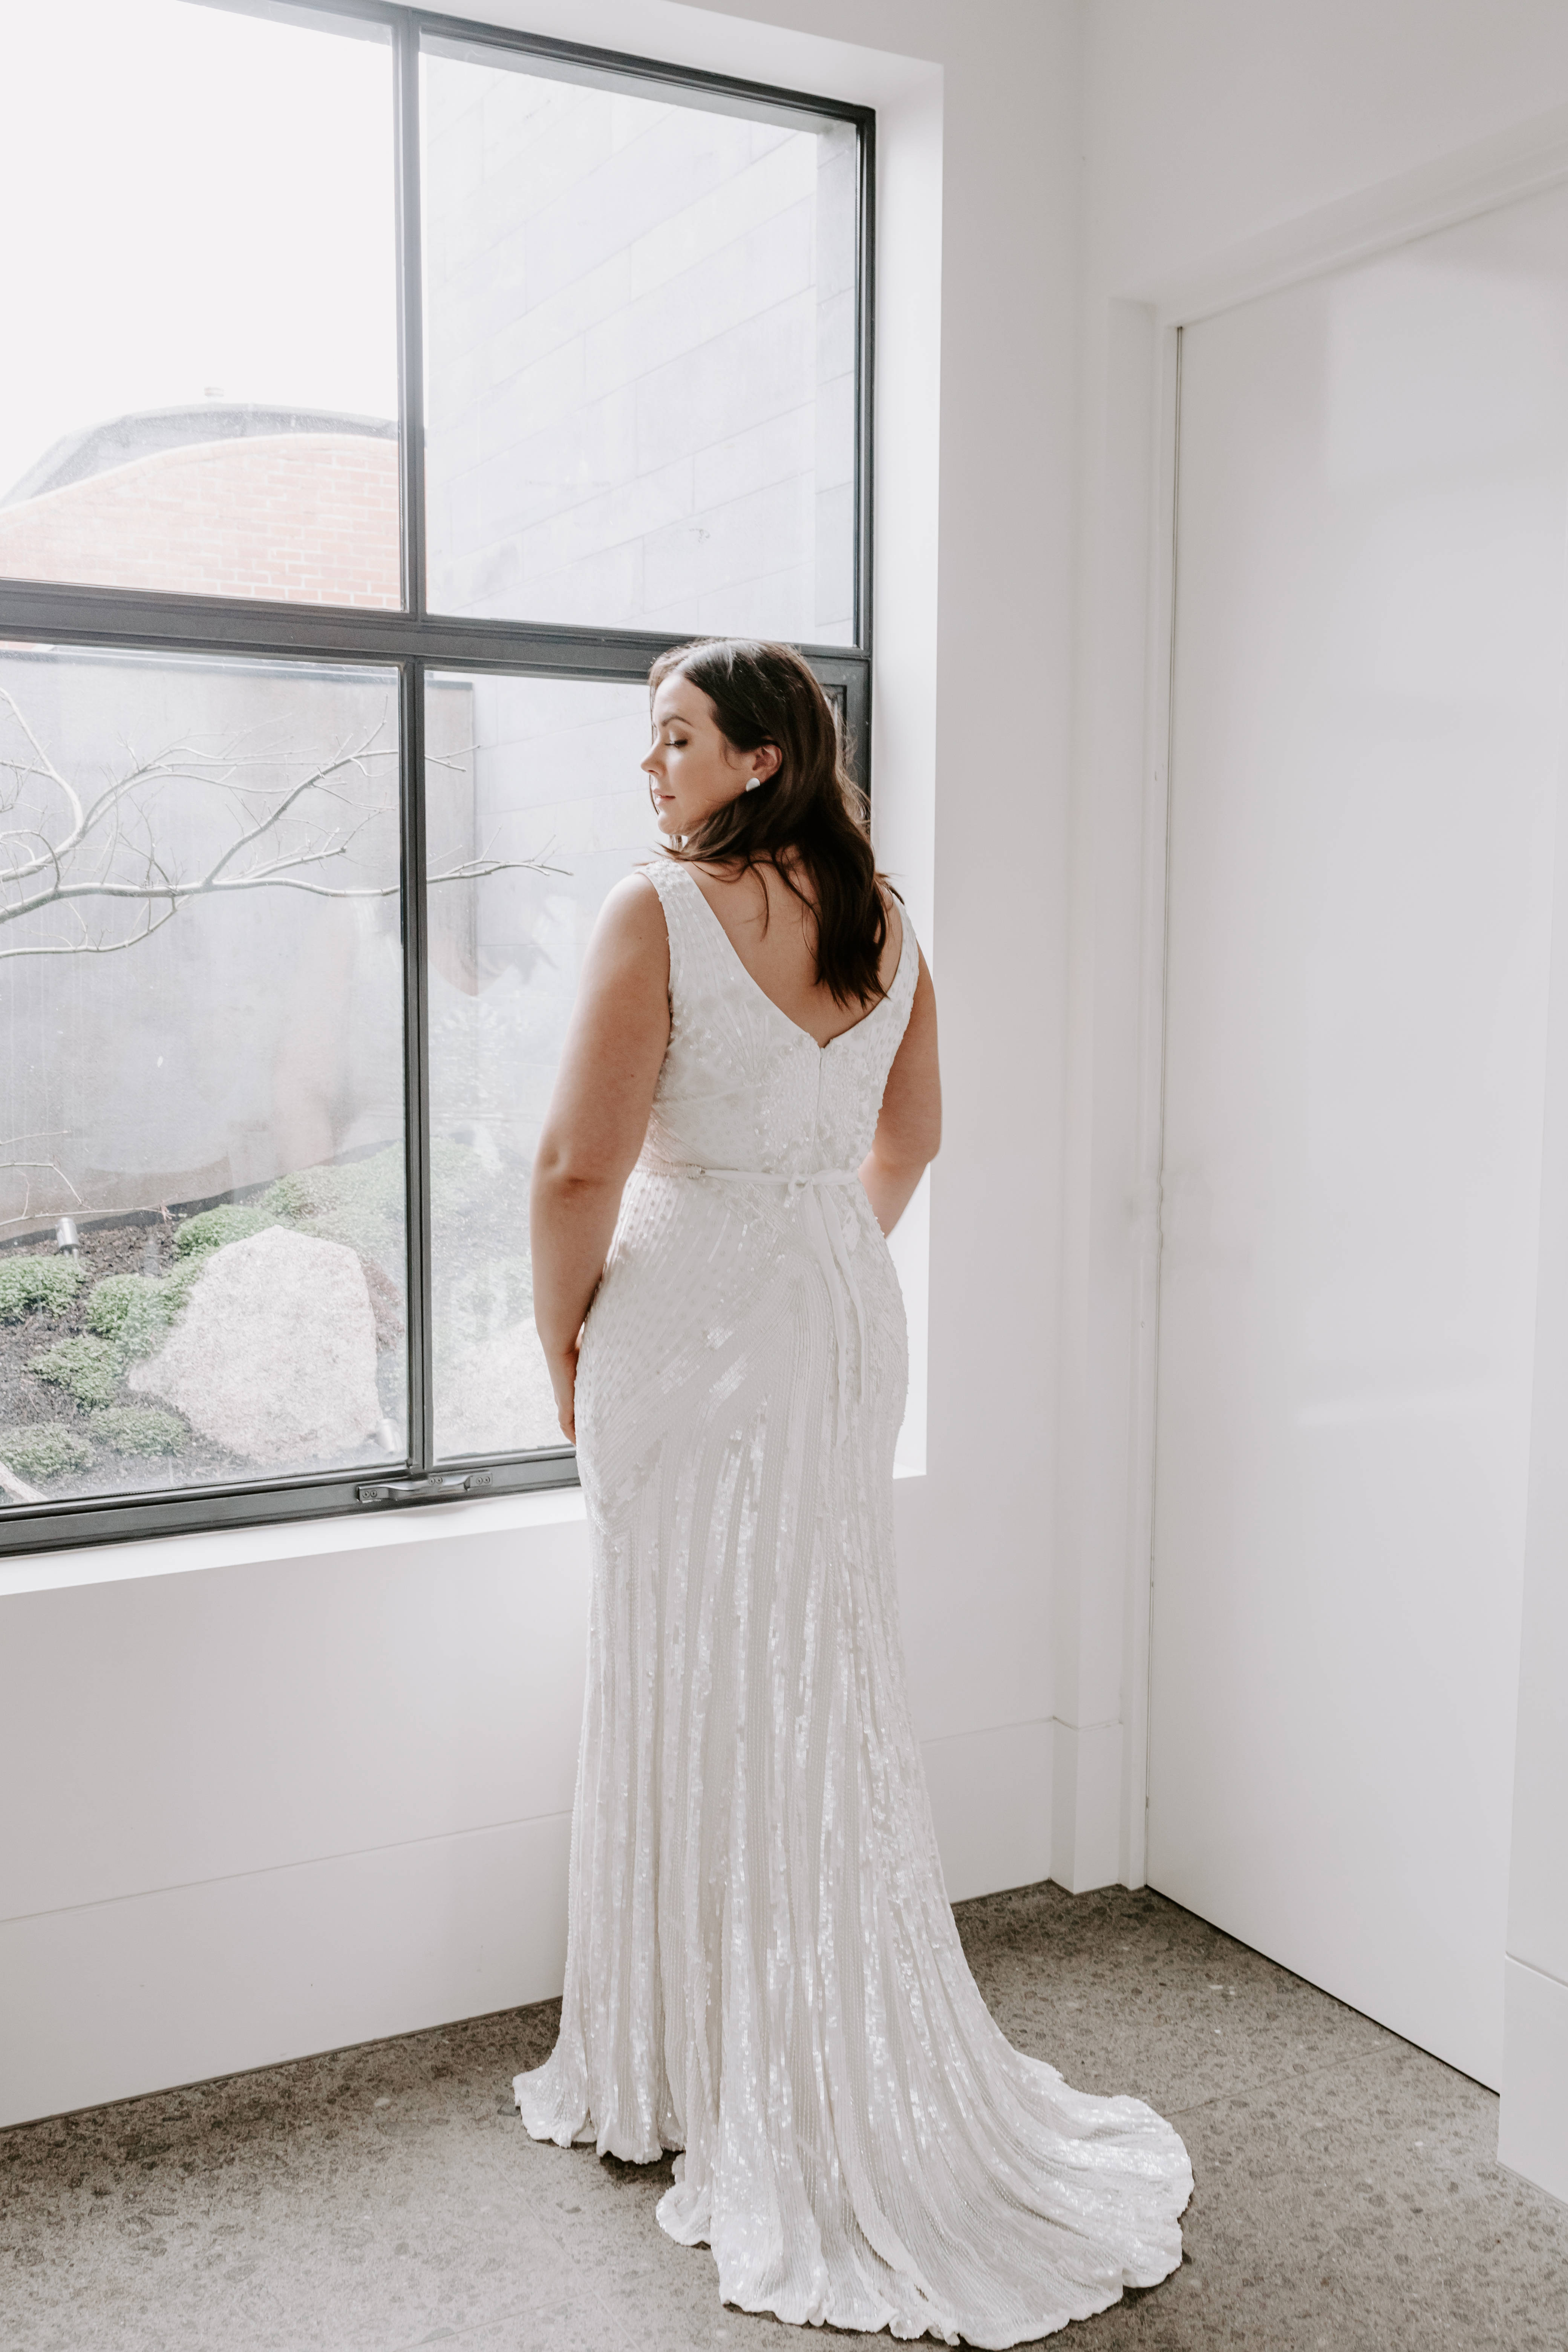 Plus size bride looking out the window in a lace wedding dress - Wedding